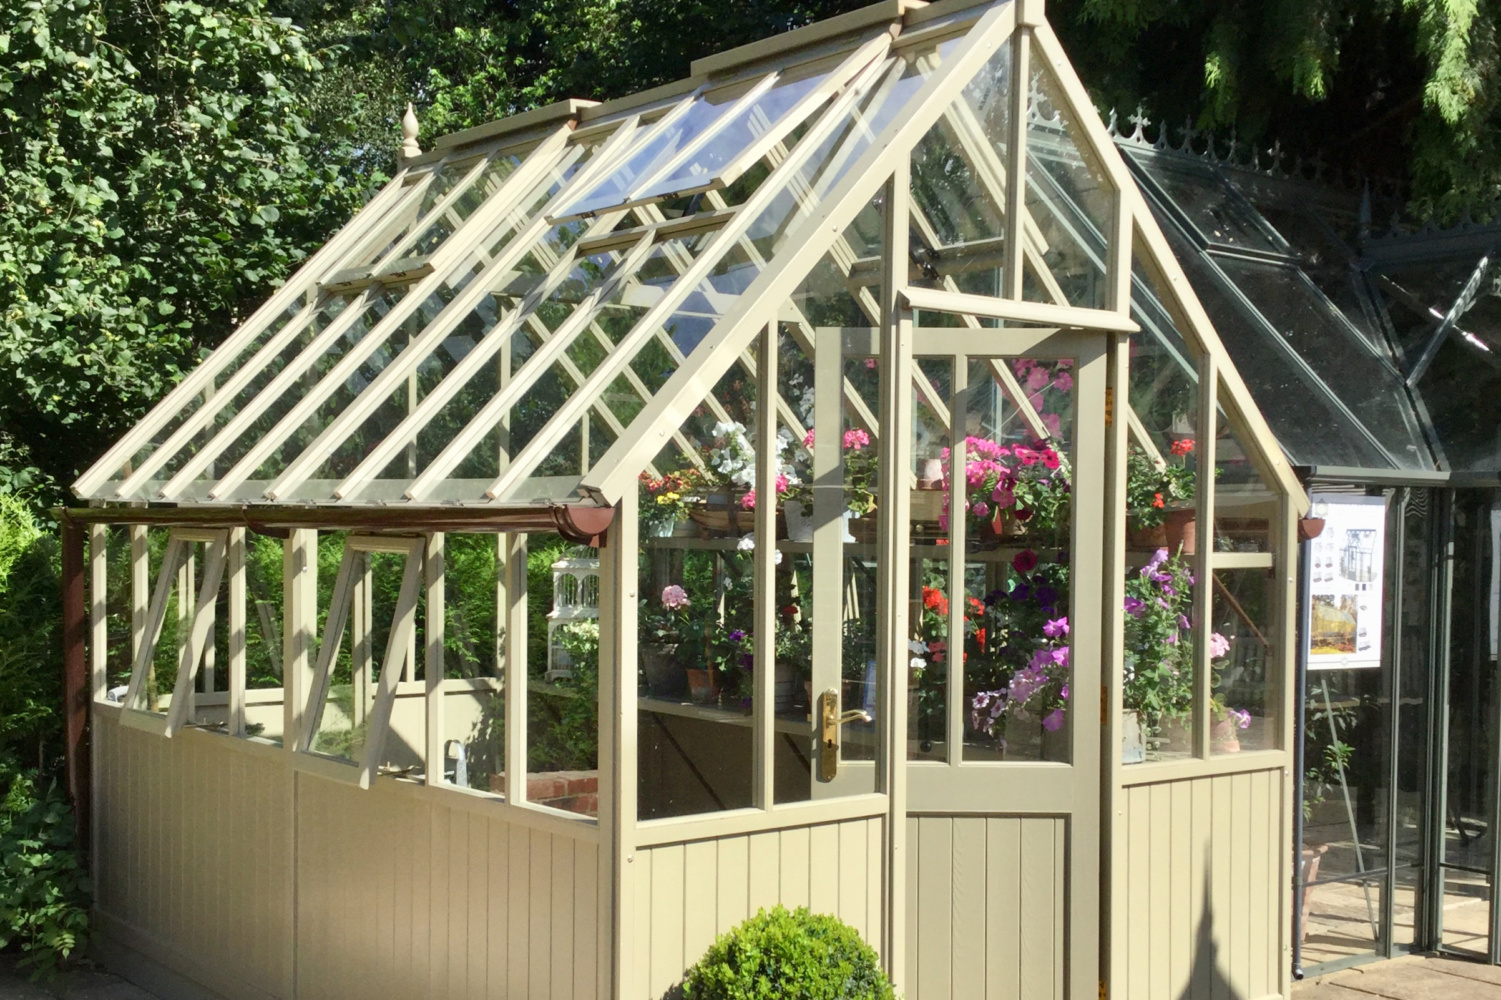 A wooden greenhouse painted in cream, filled with summer flowers